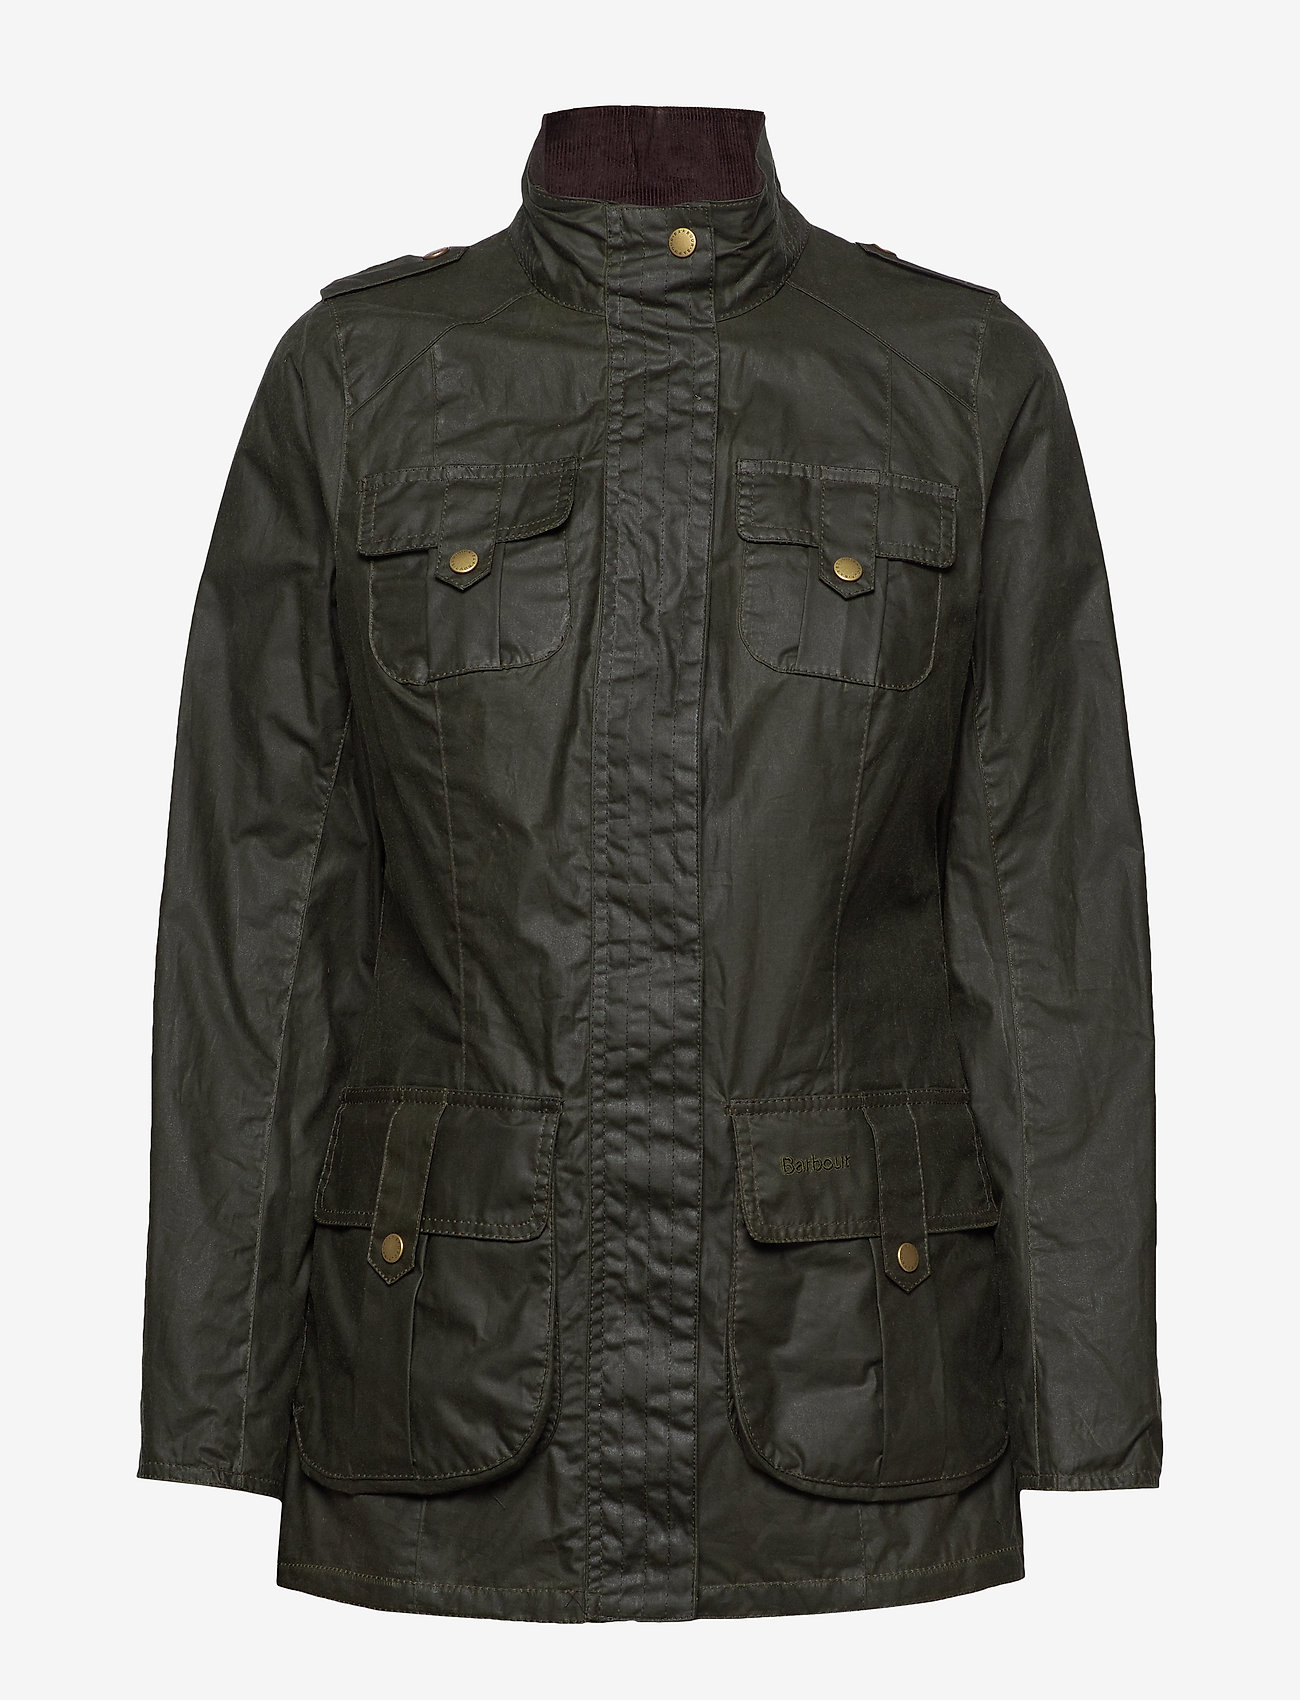 Barbour - Barbour Defence LW Wax - archive olive/c - 1